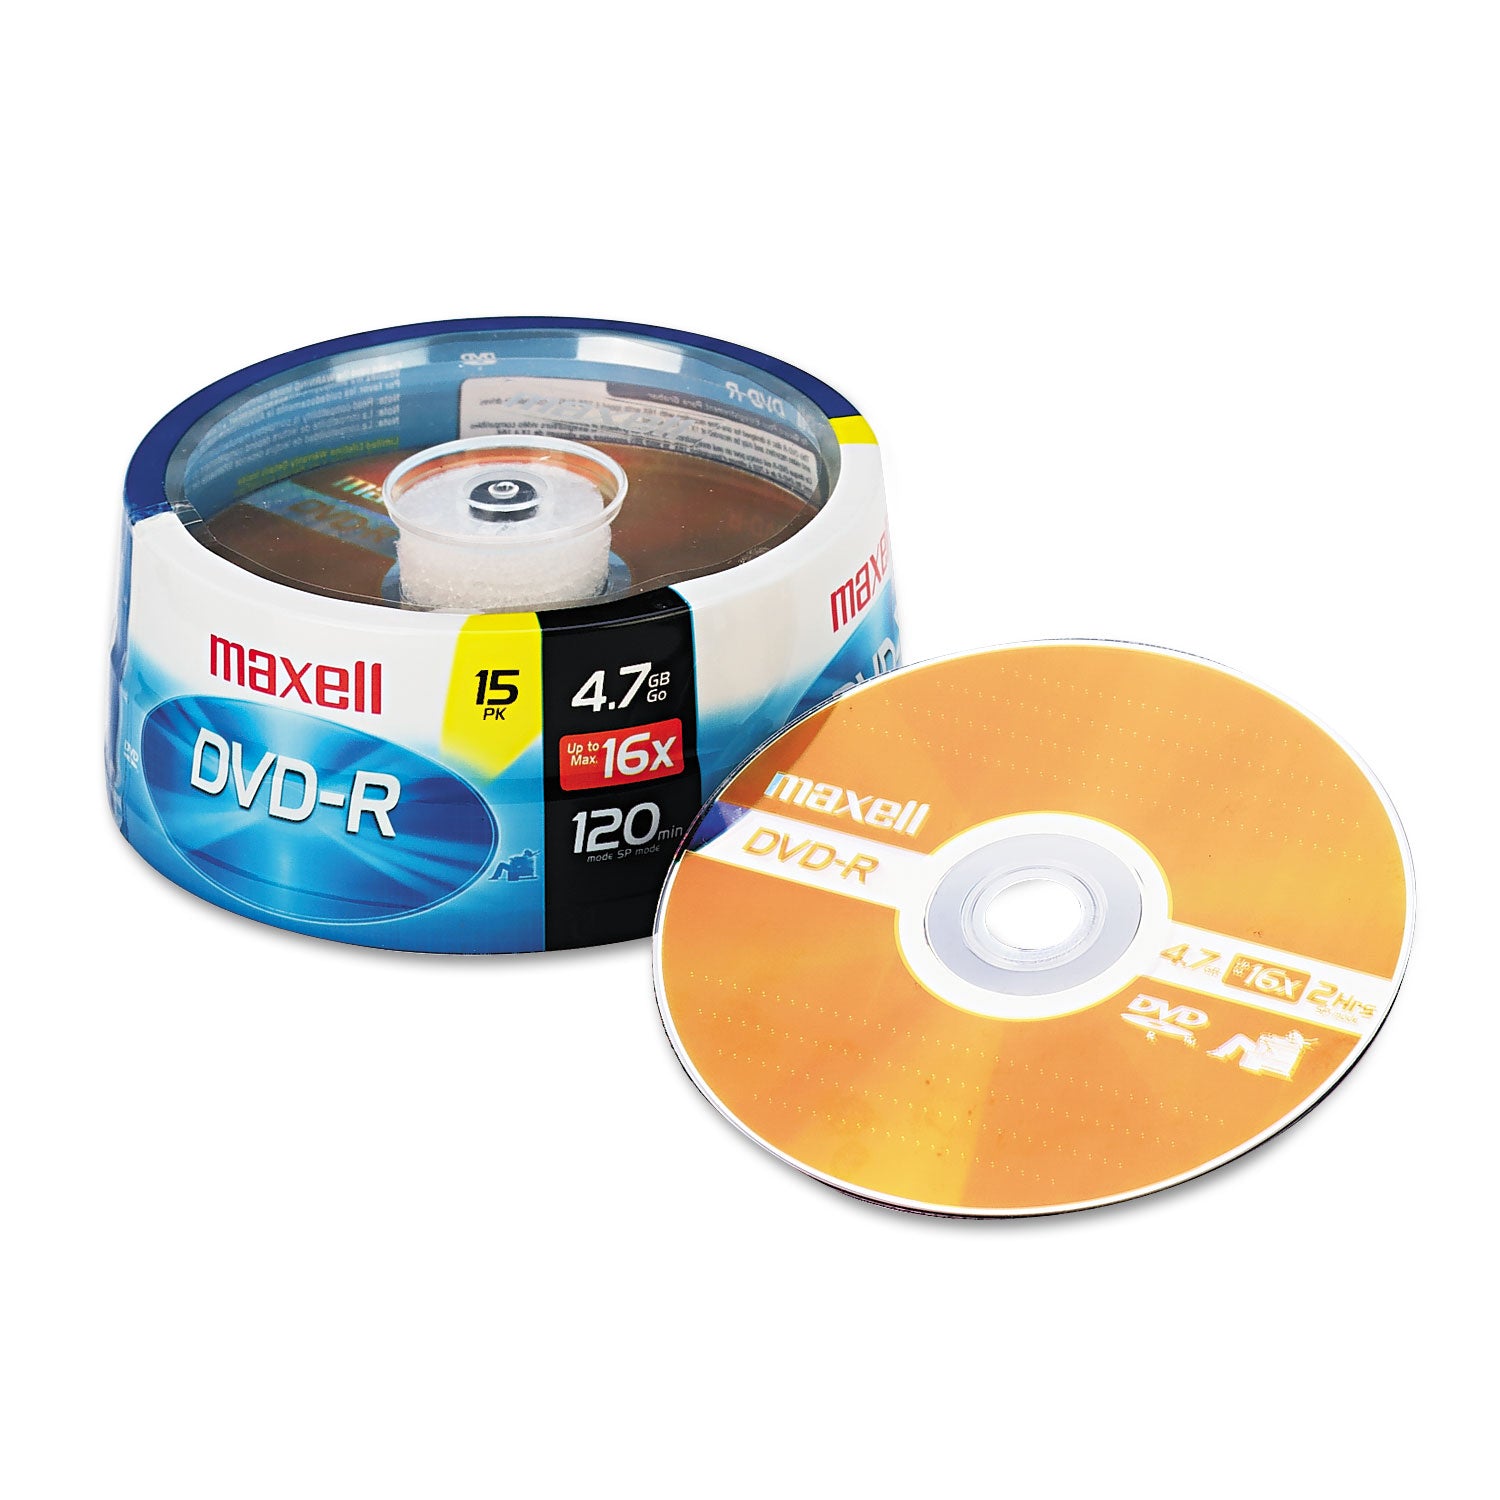 DVD-R Recordable Disc, 4.7 GB, 16x, Spindle, Gold, 15/Pack - 